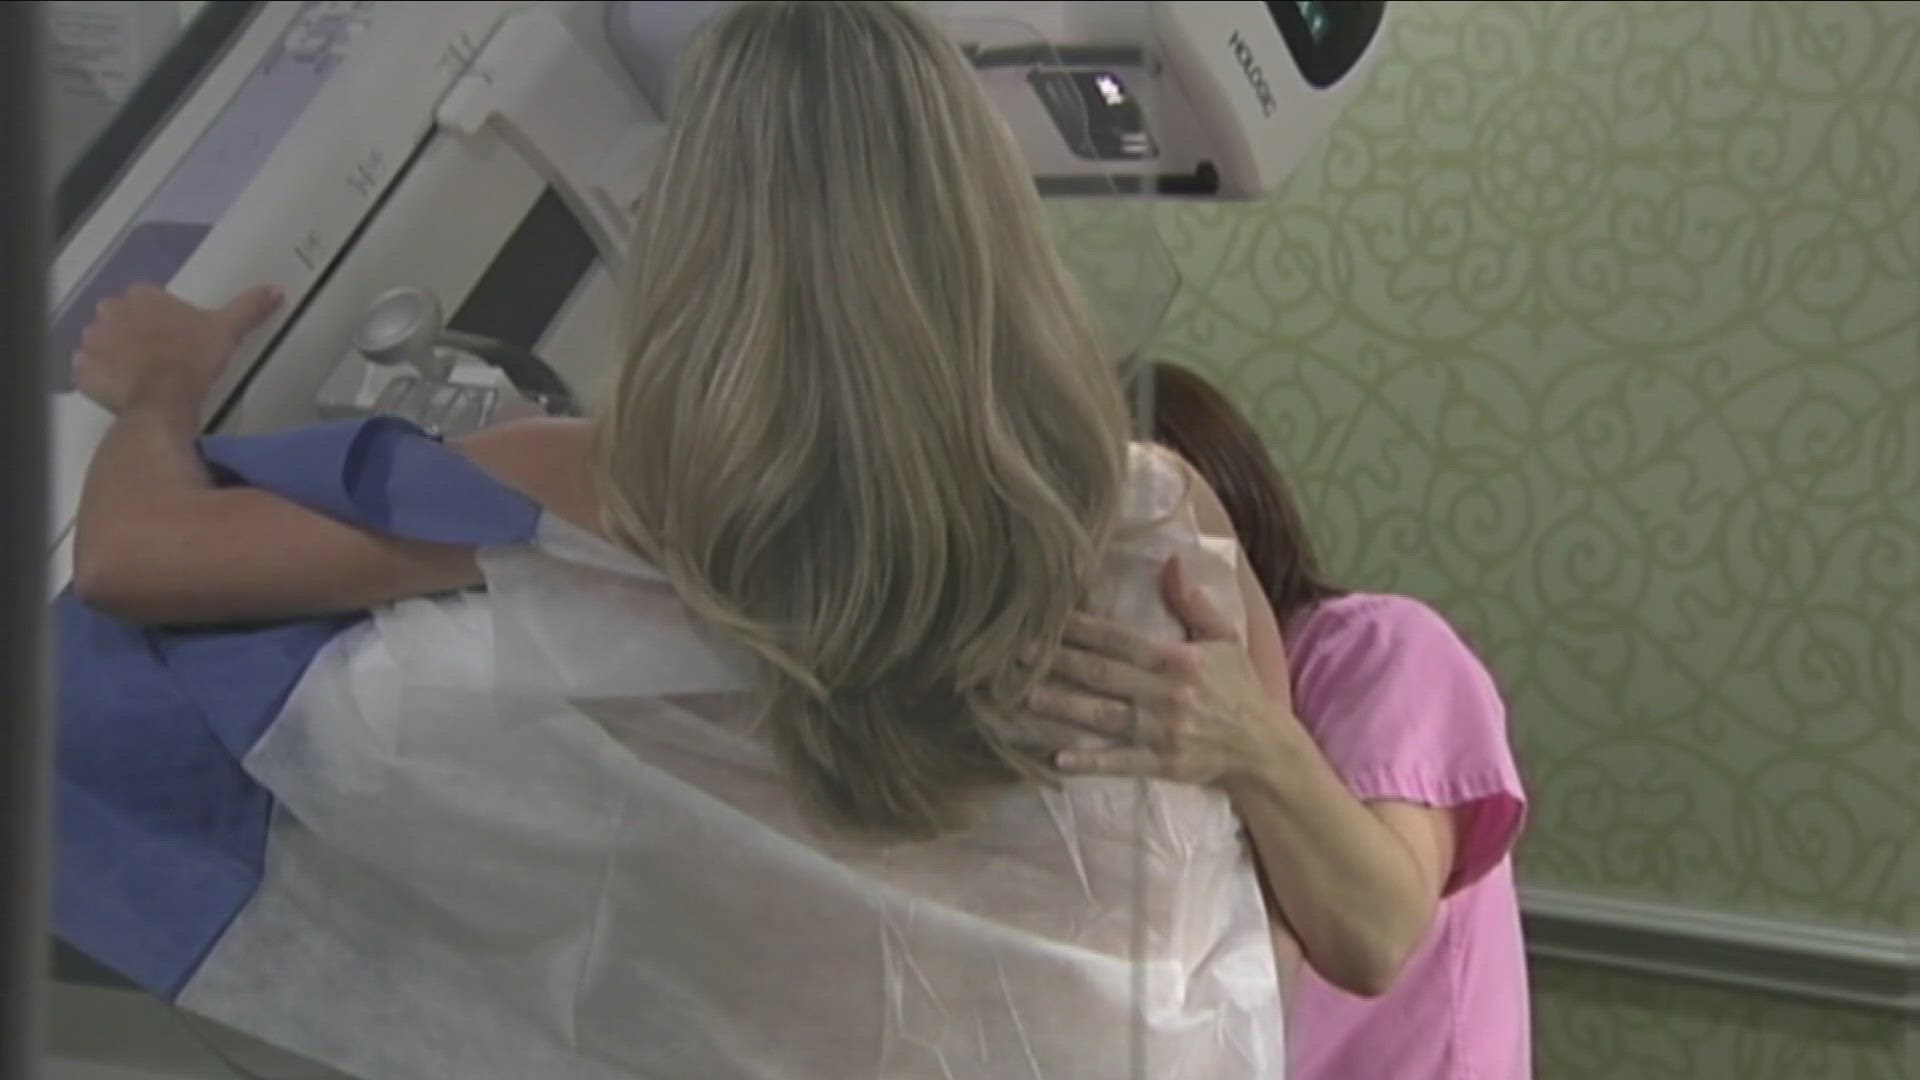 A bill awaiting Gov. Kathy Hochul's signature would guarantee more coverage for breast cancer screenings in New York.